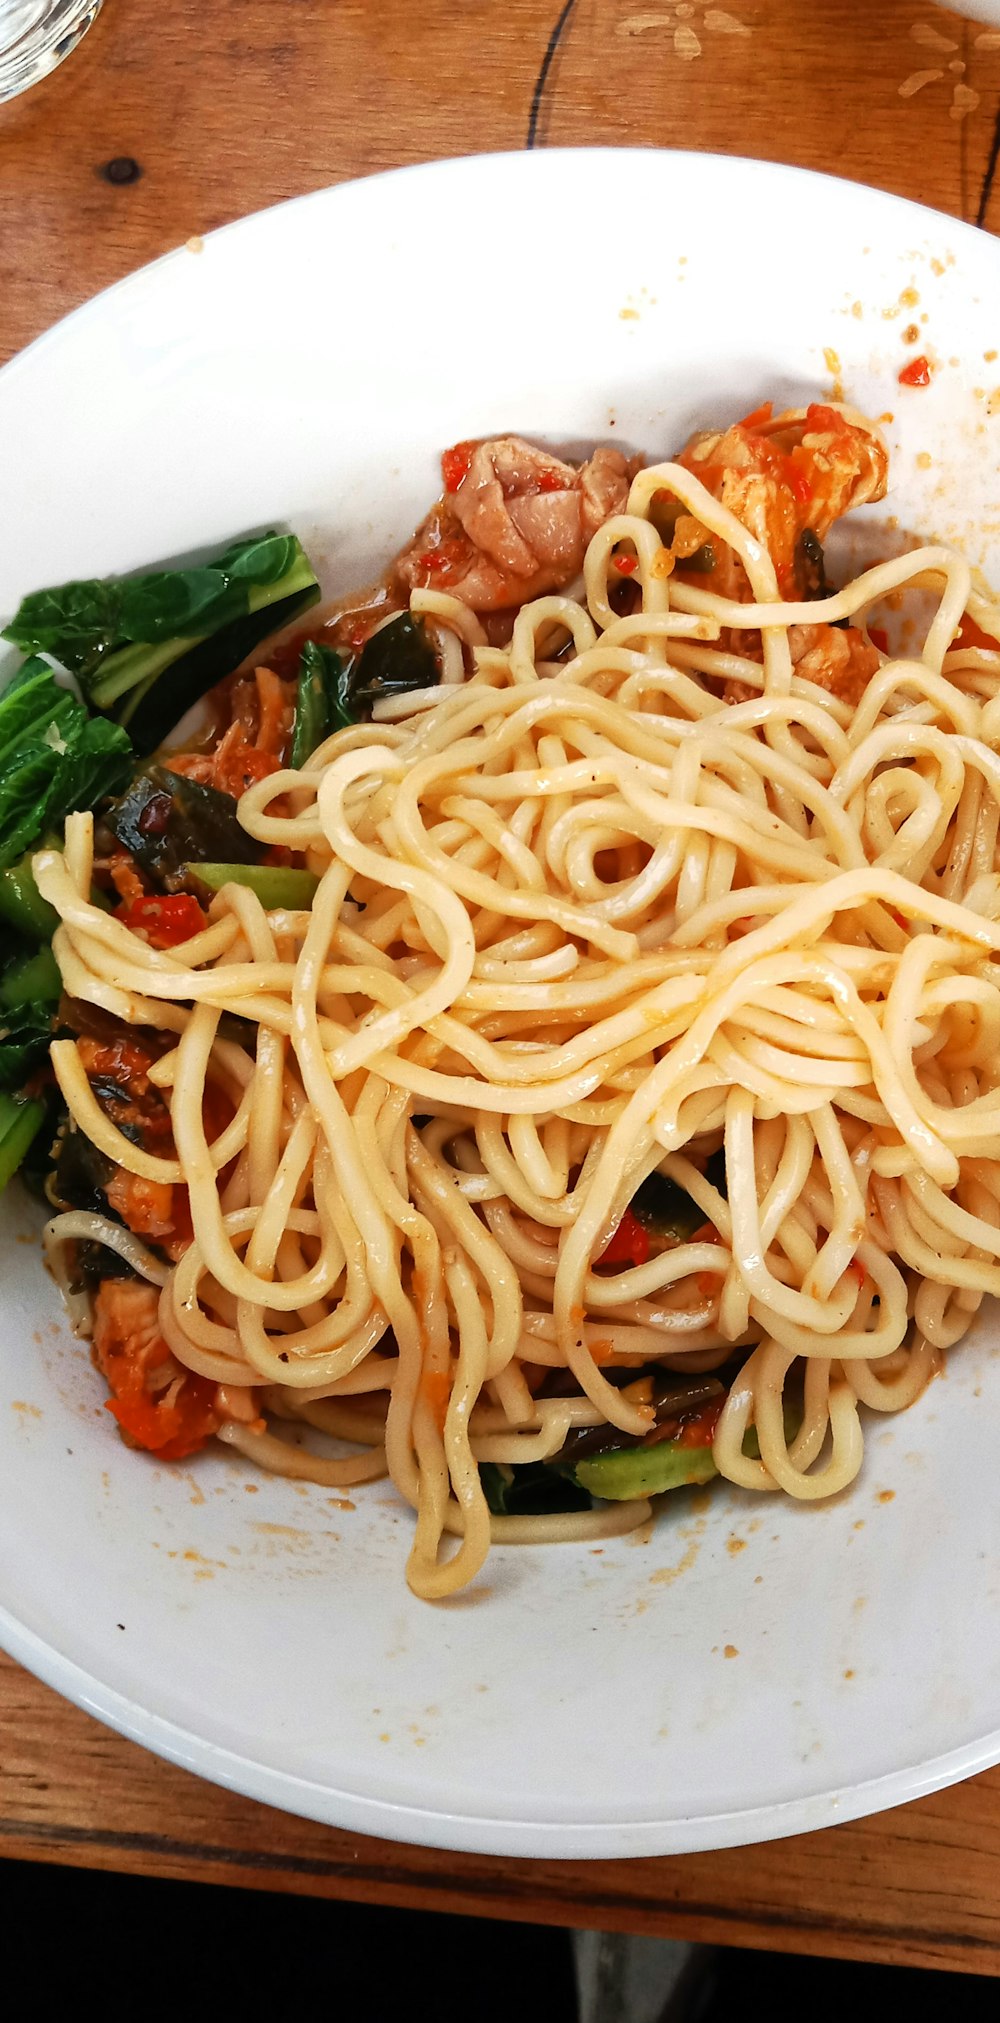 a plate of noodles and vegetables on a table